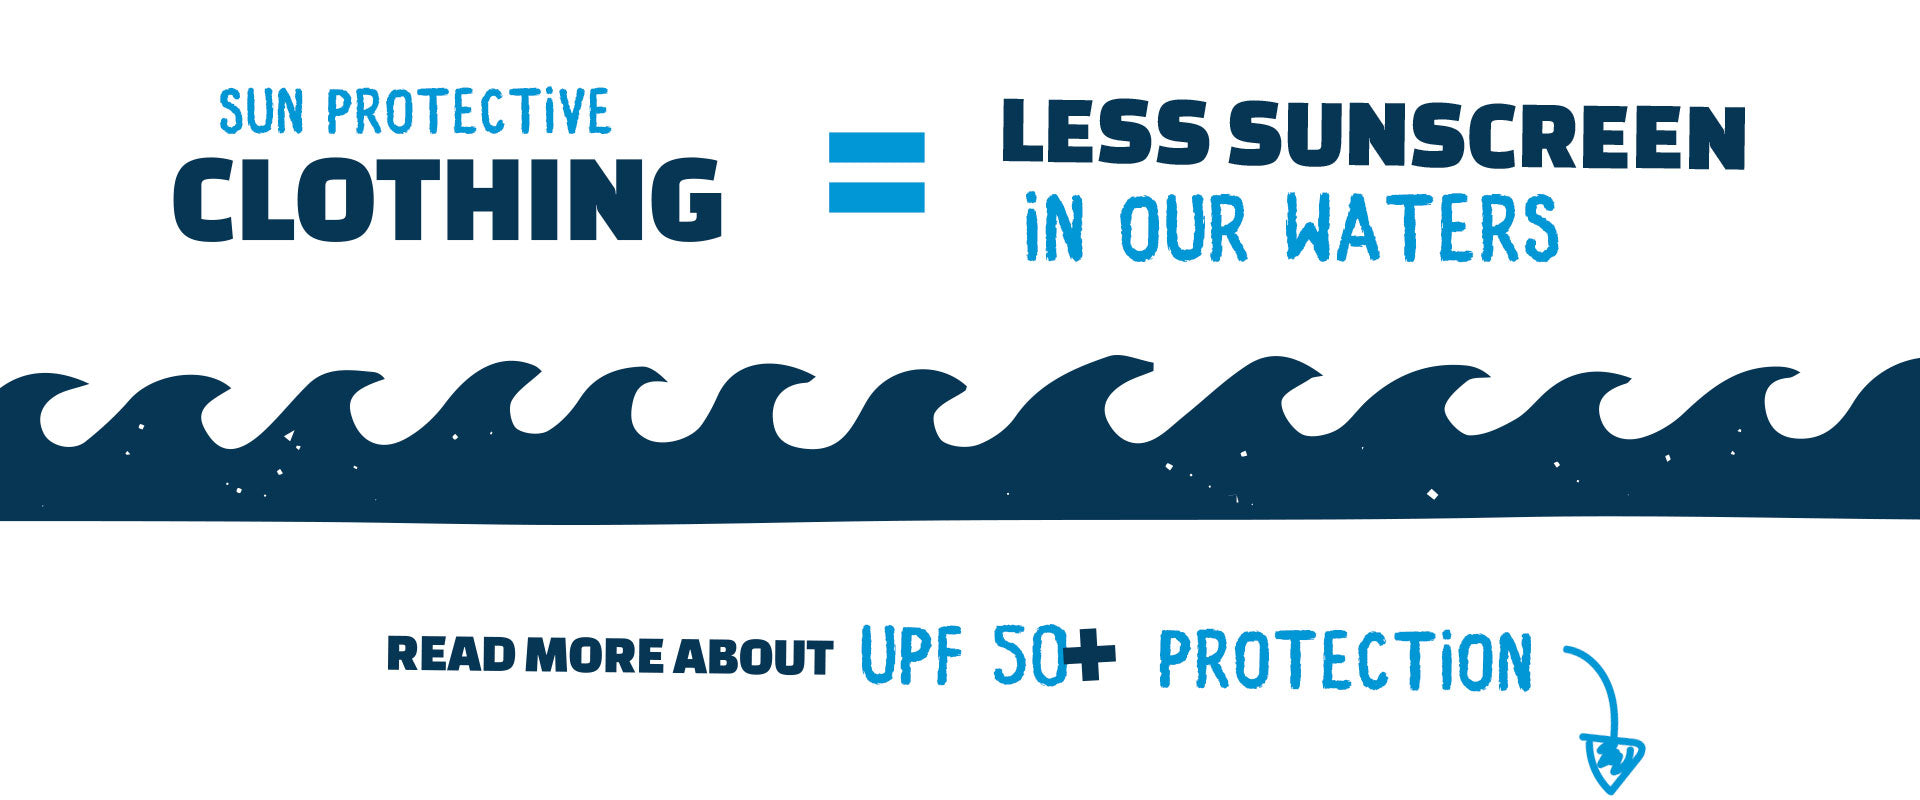 Wearing Sun Protective Clothing means less sunscreen in our waterways.